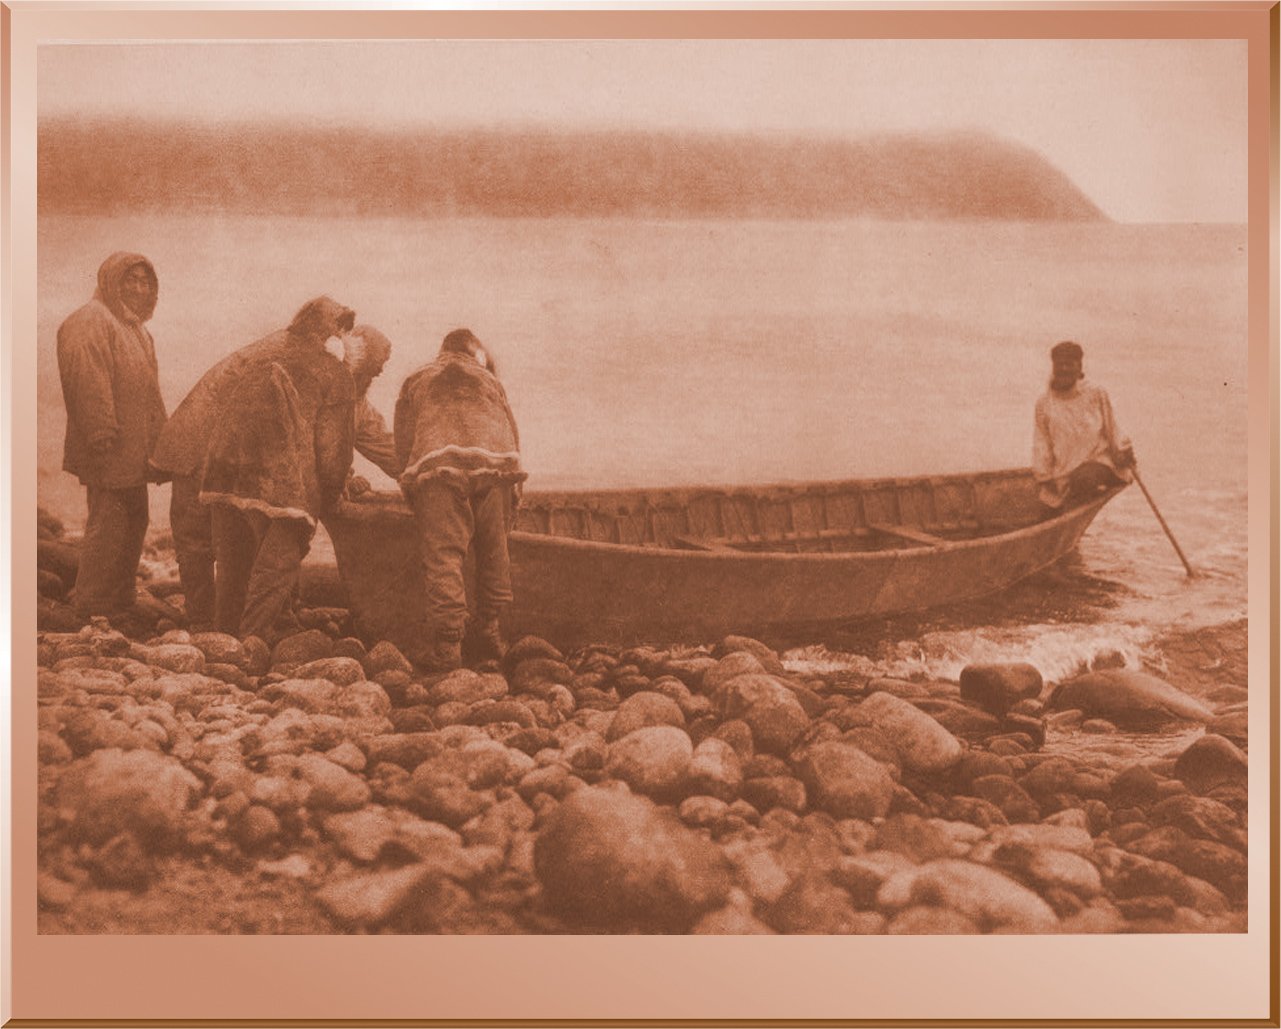 Launching the Boat - Little Diomede Island